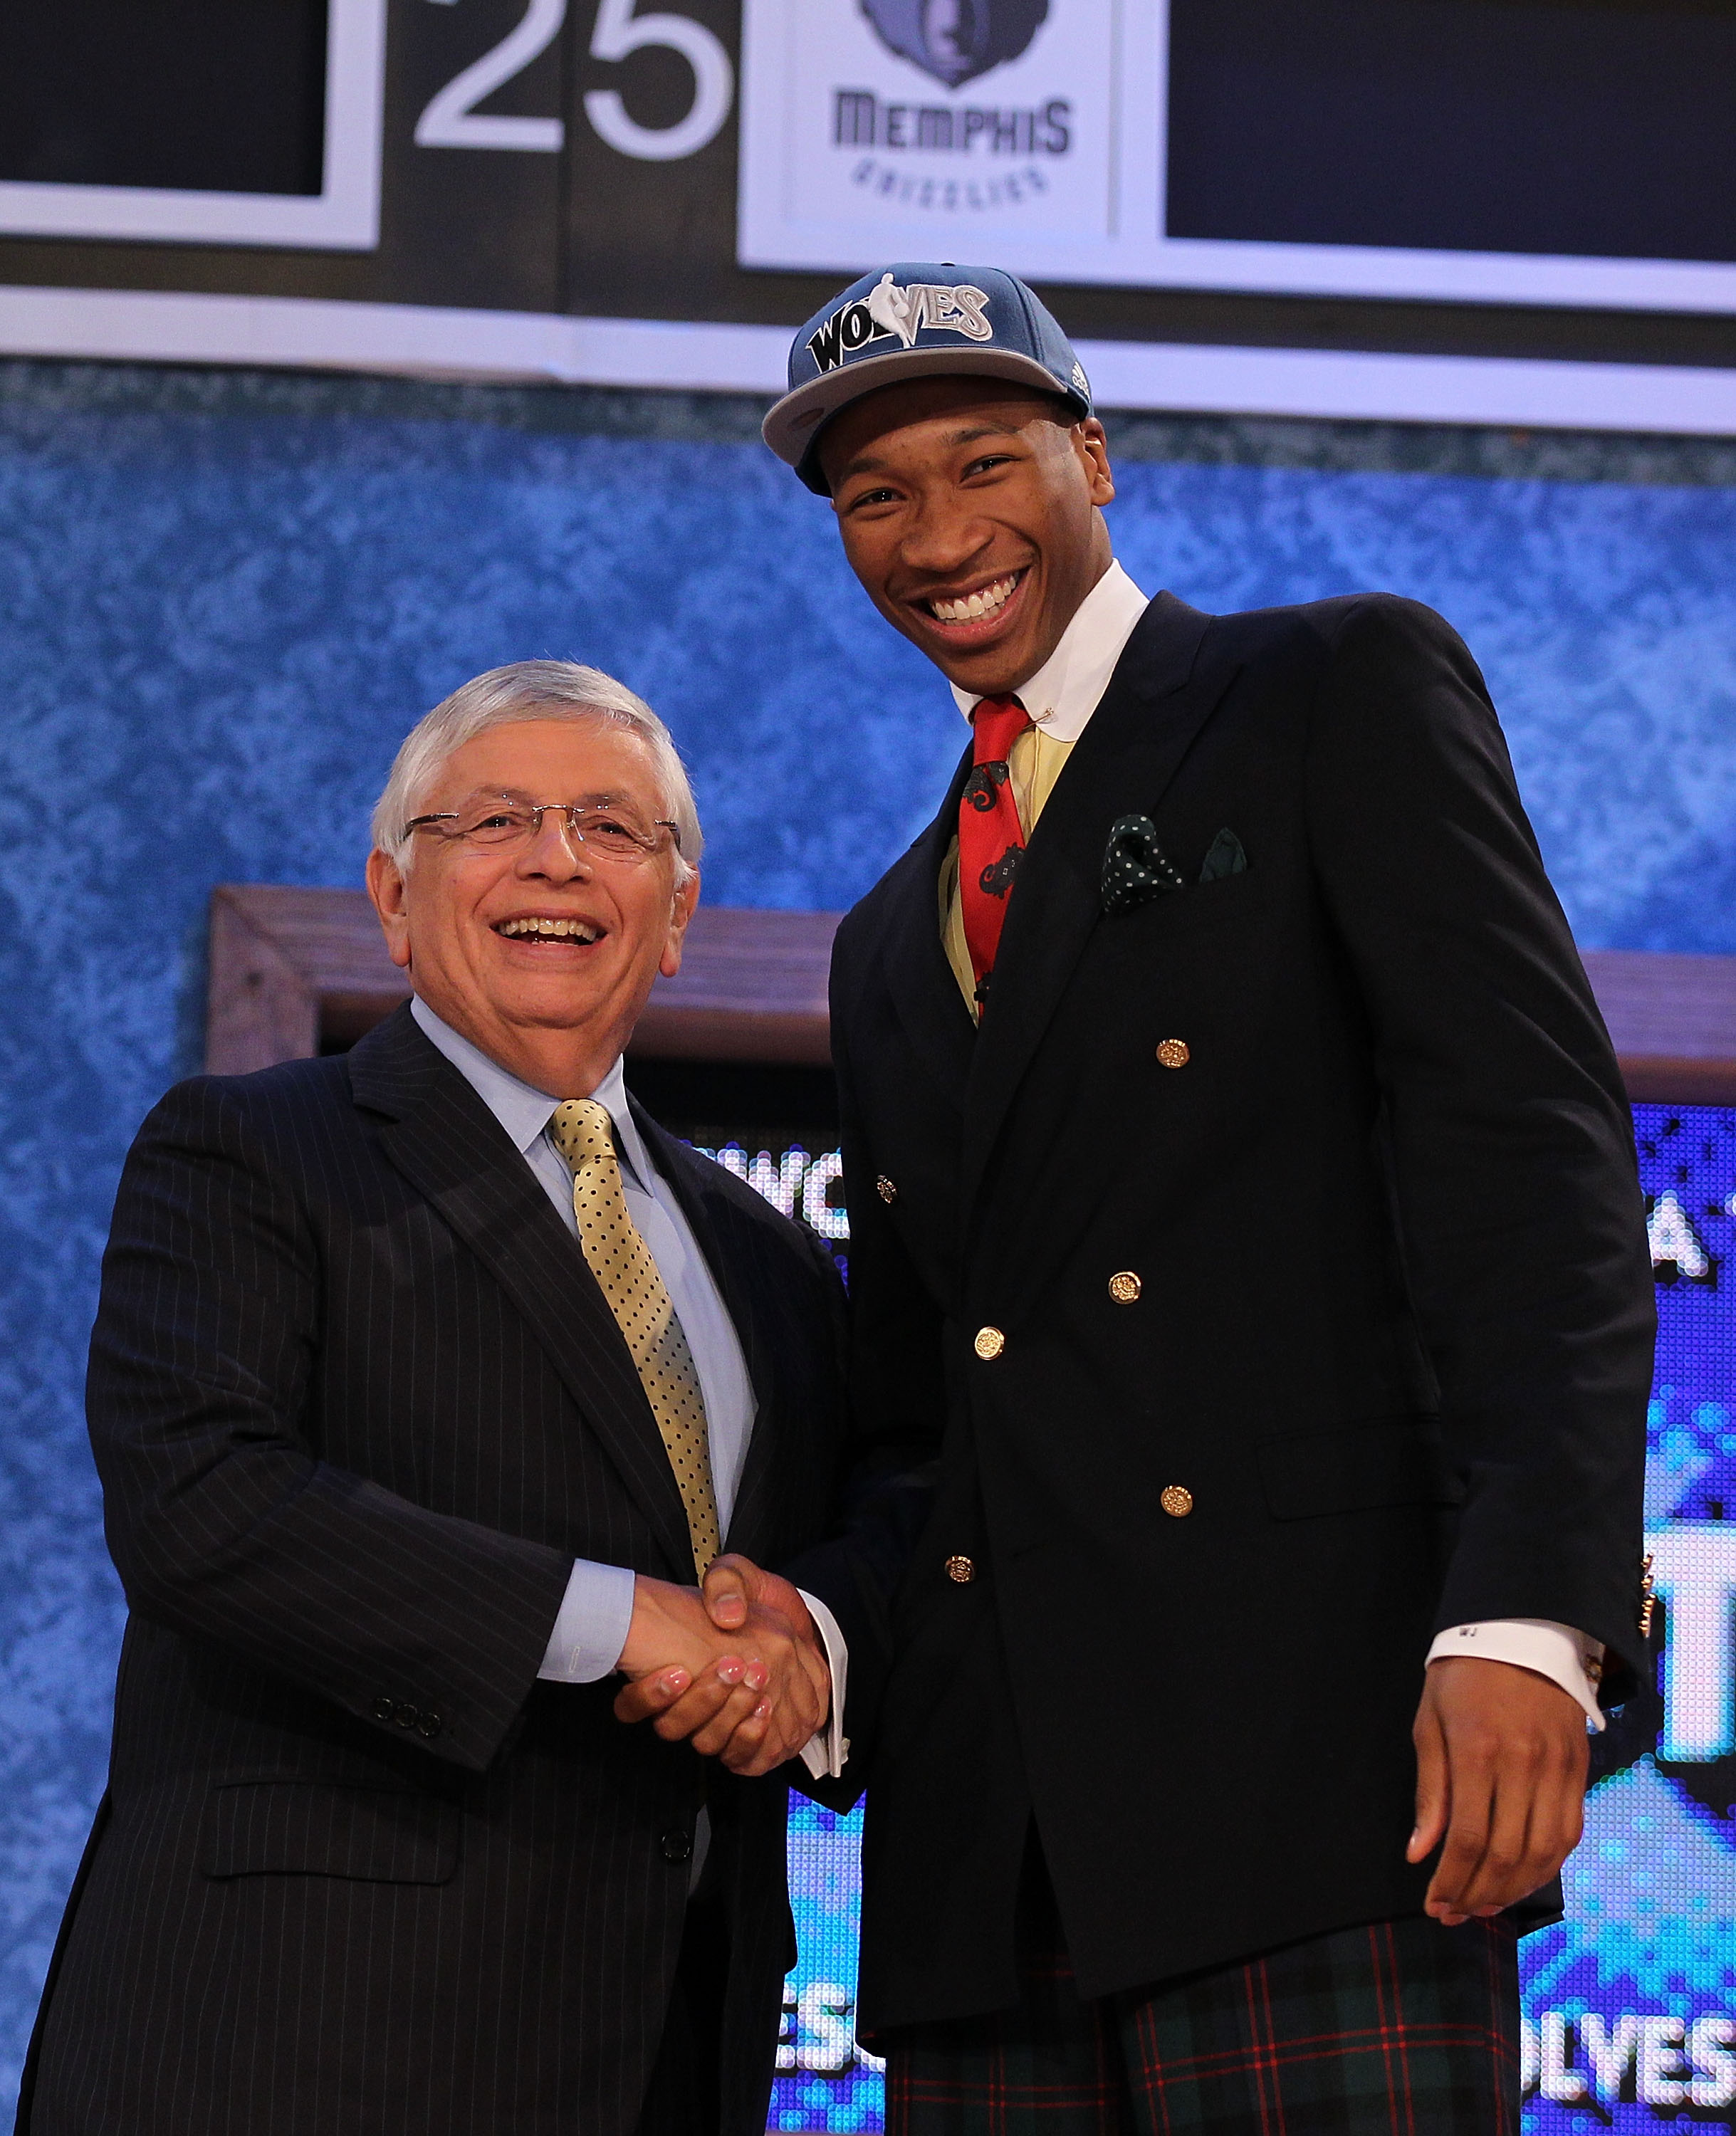 NEW YORK - JUNE 24:  Wesley Johnson stands with NBA Commisioner David Stern after being drafted by The Minnesota Timberwolves at Madison Square Garden on June 24, 2010 in New York City.  NOTE TO USER: User expressly acknowledges and agrees that, by downlo